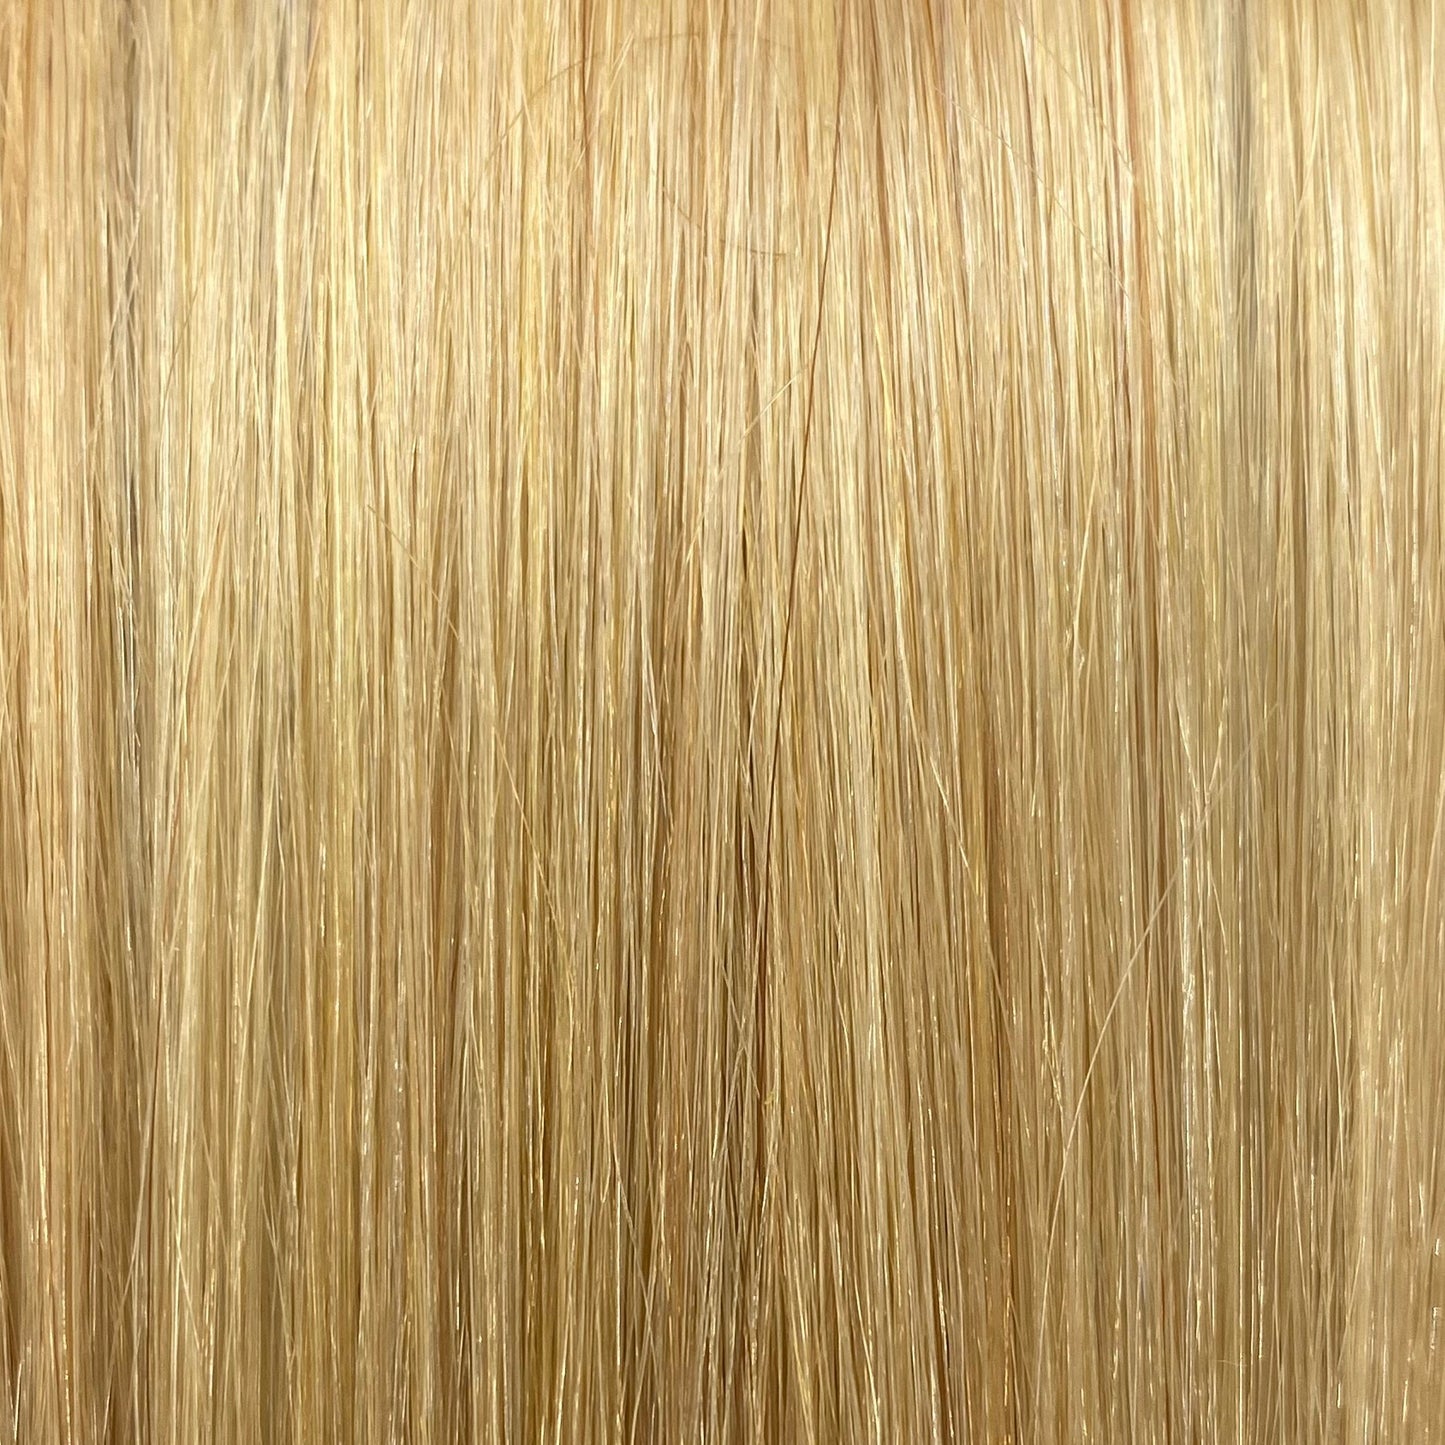 Fusion hair extensions #DB2 - 50cm/20 inches - Light Golden Blonde Fusion Euro So Cap 